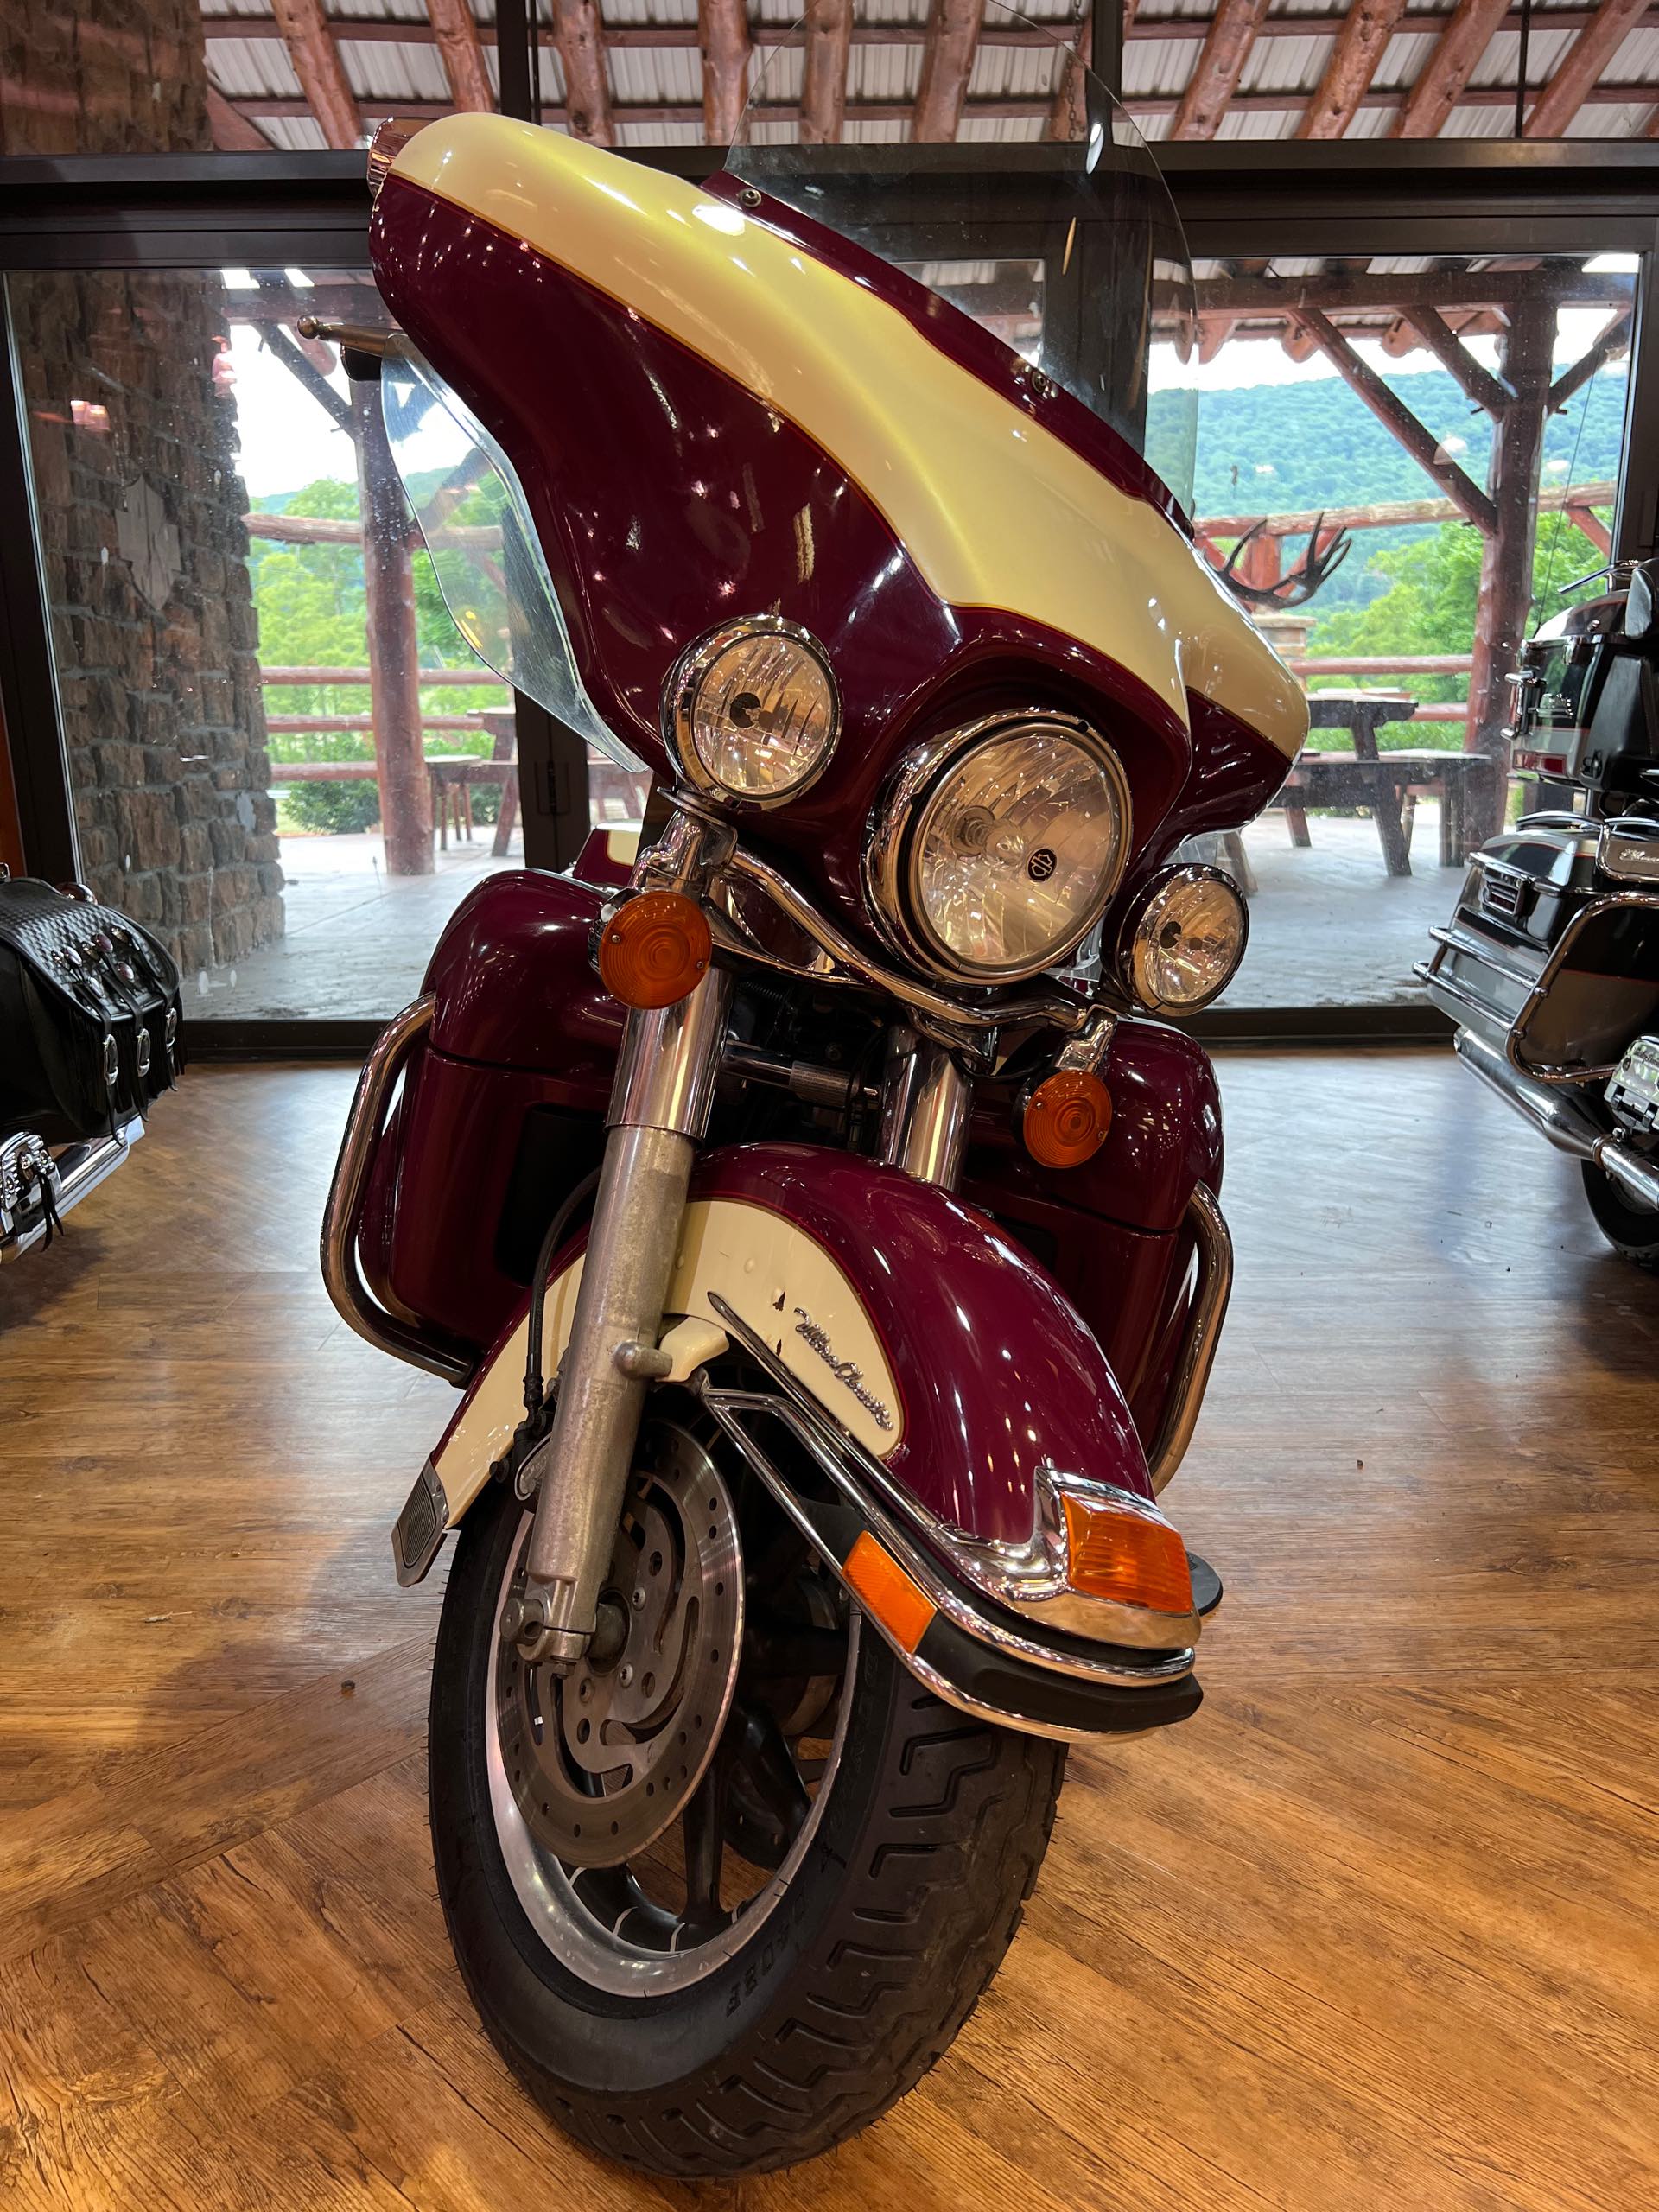 2007 Harley-Davidson Electra Glide Ultra Classic at #1 Cycle Center